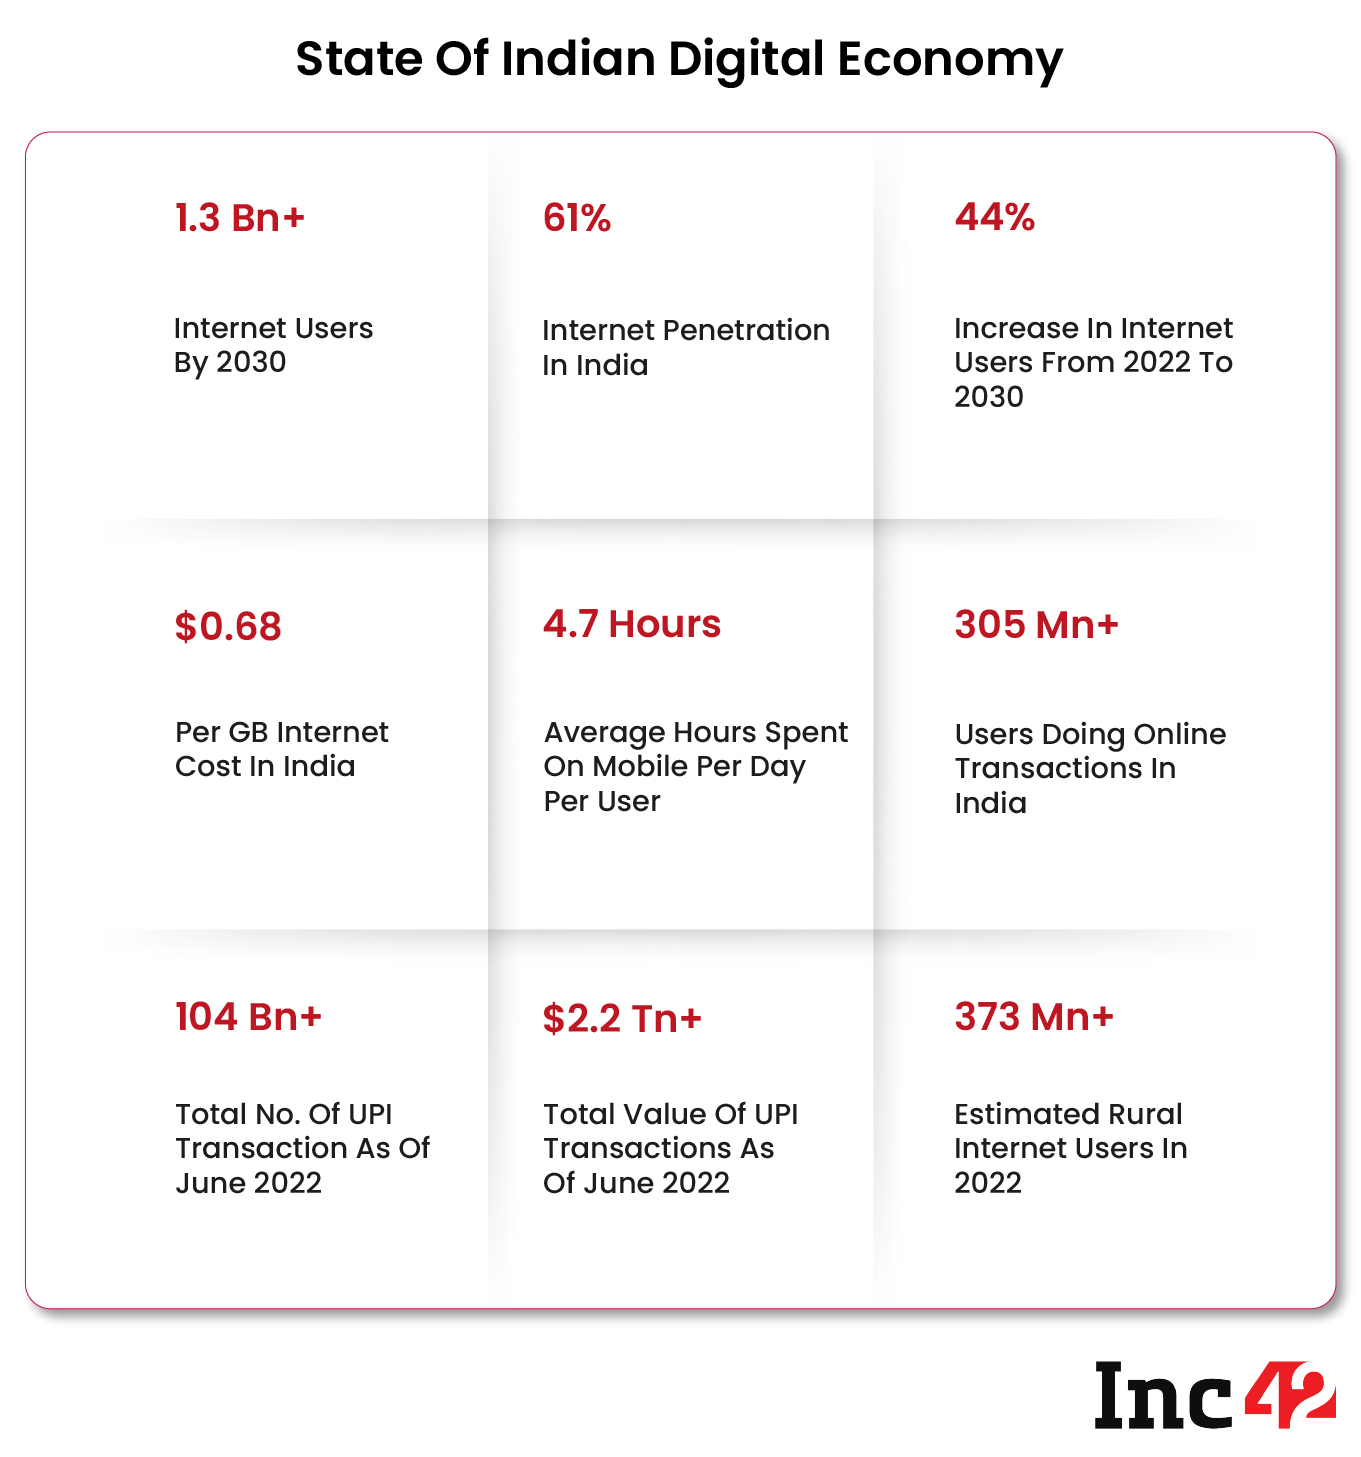 State of Indian Digital Economy